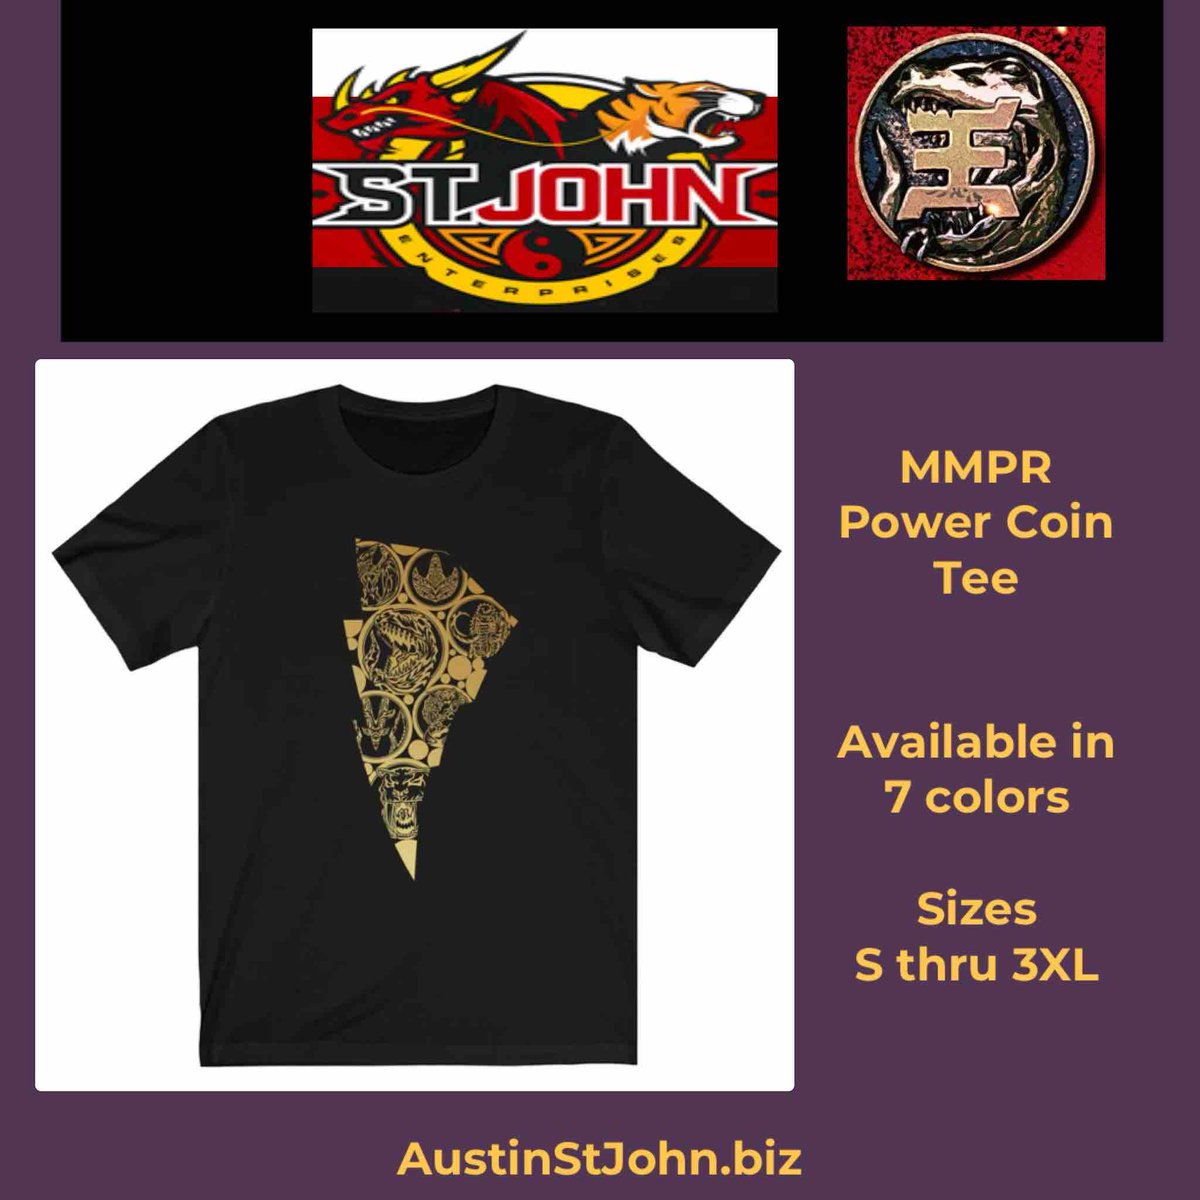 Need a way to rep all your favorite MMPR team? Check out the Power Coin shirt that was combined with the iconic thunderbolt. Order yours today! austinstjohn.biz/products/mmpr-…. #powerrangers #mmpr #redempt1on #redranger